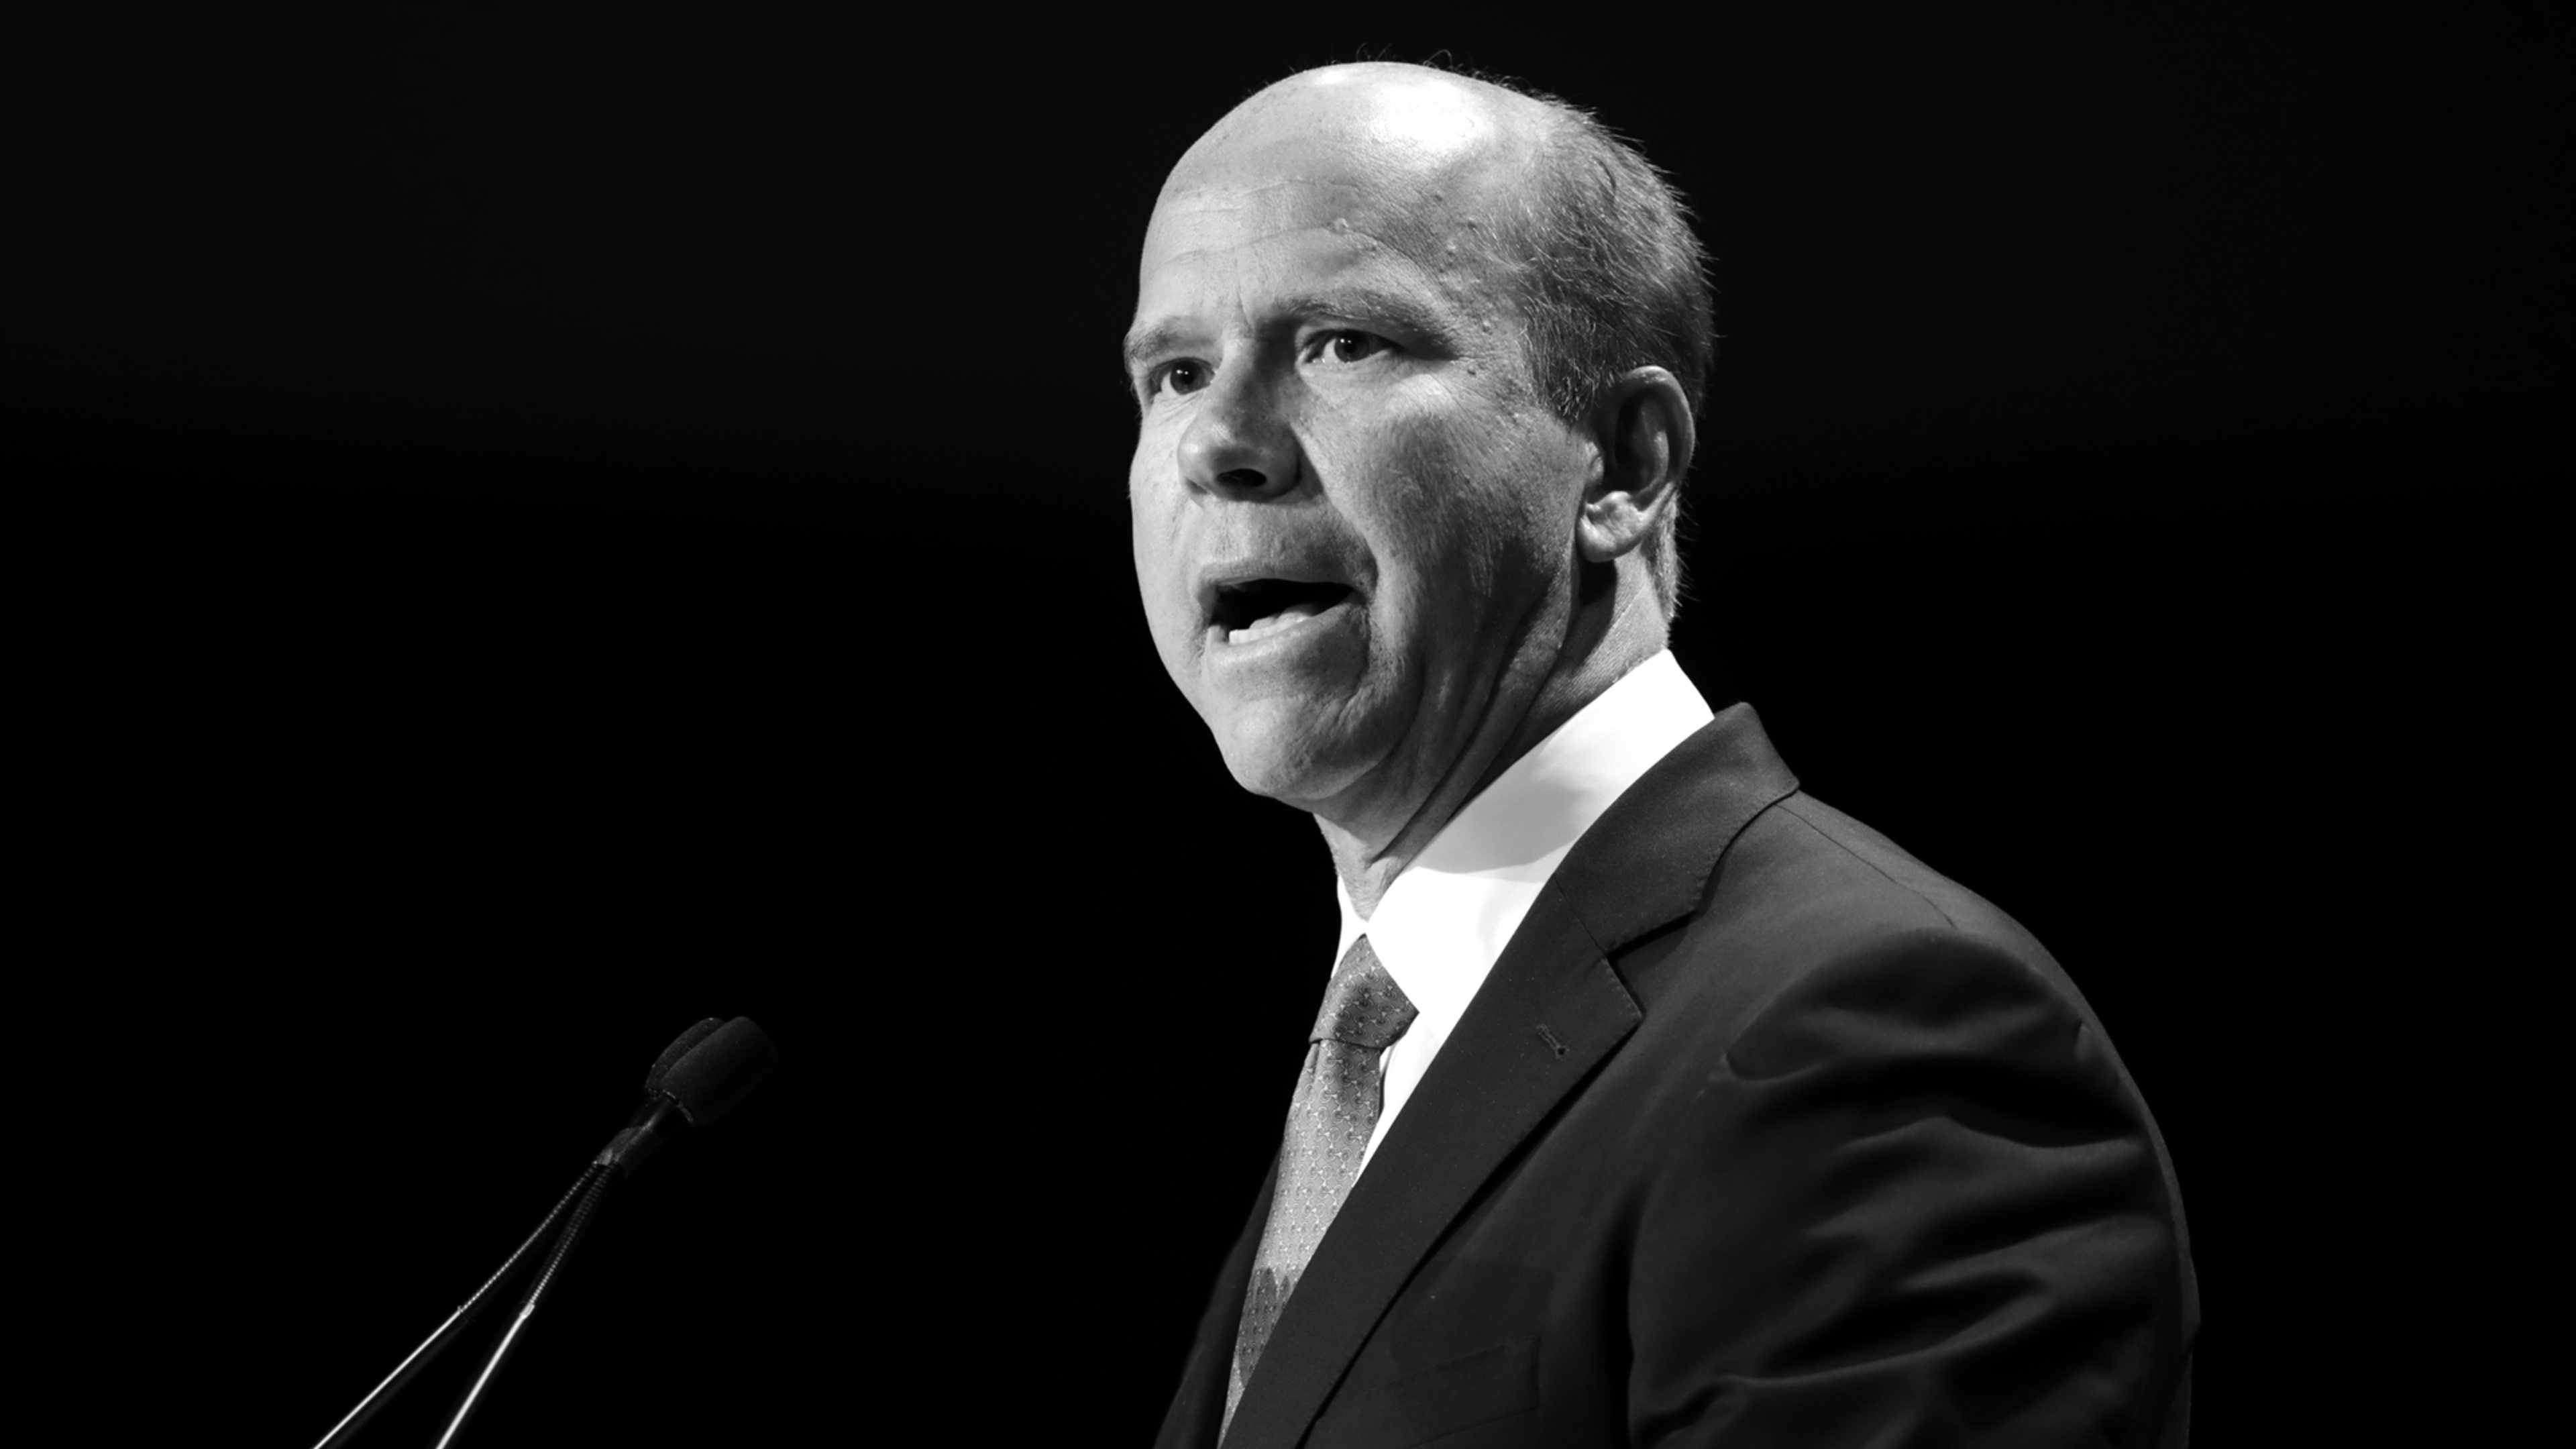 People are mad that CNN gave John Delaney so much airtime during the Democratic debates